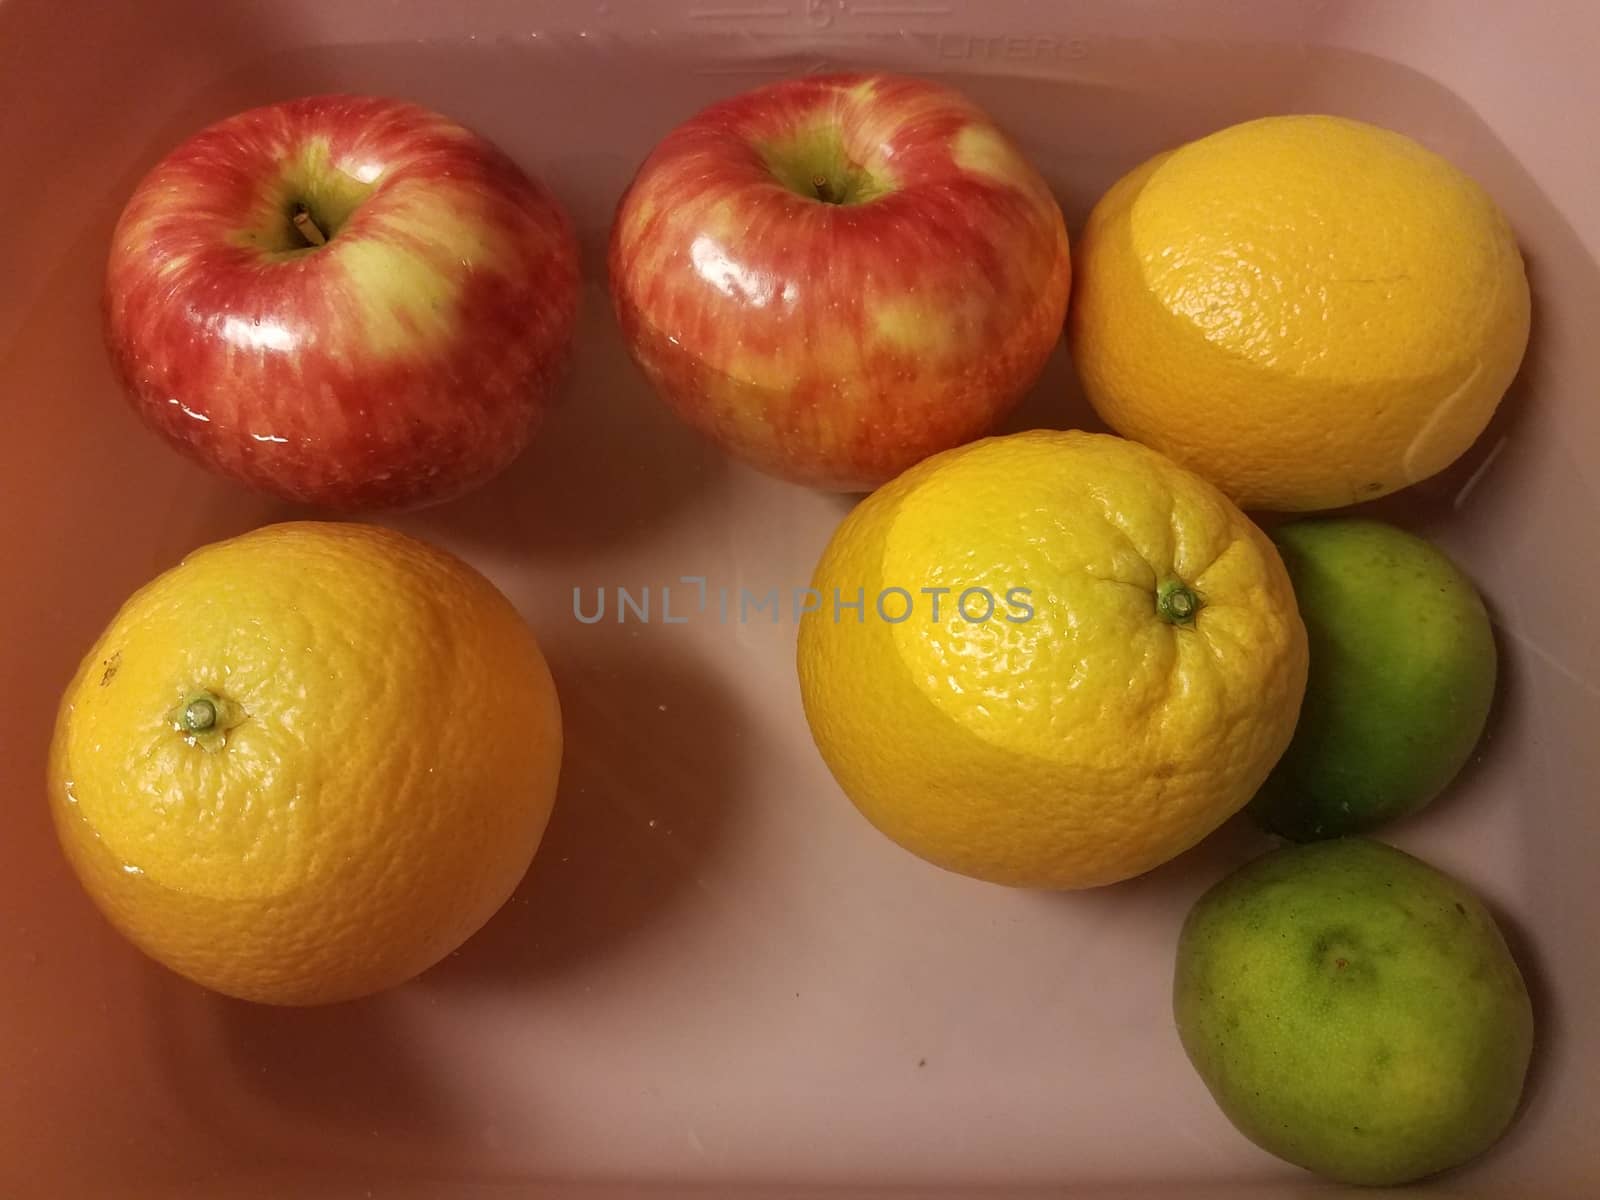 apples and oranges and limes floating in water in pink container